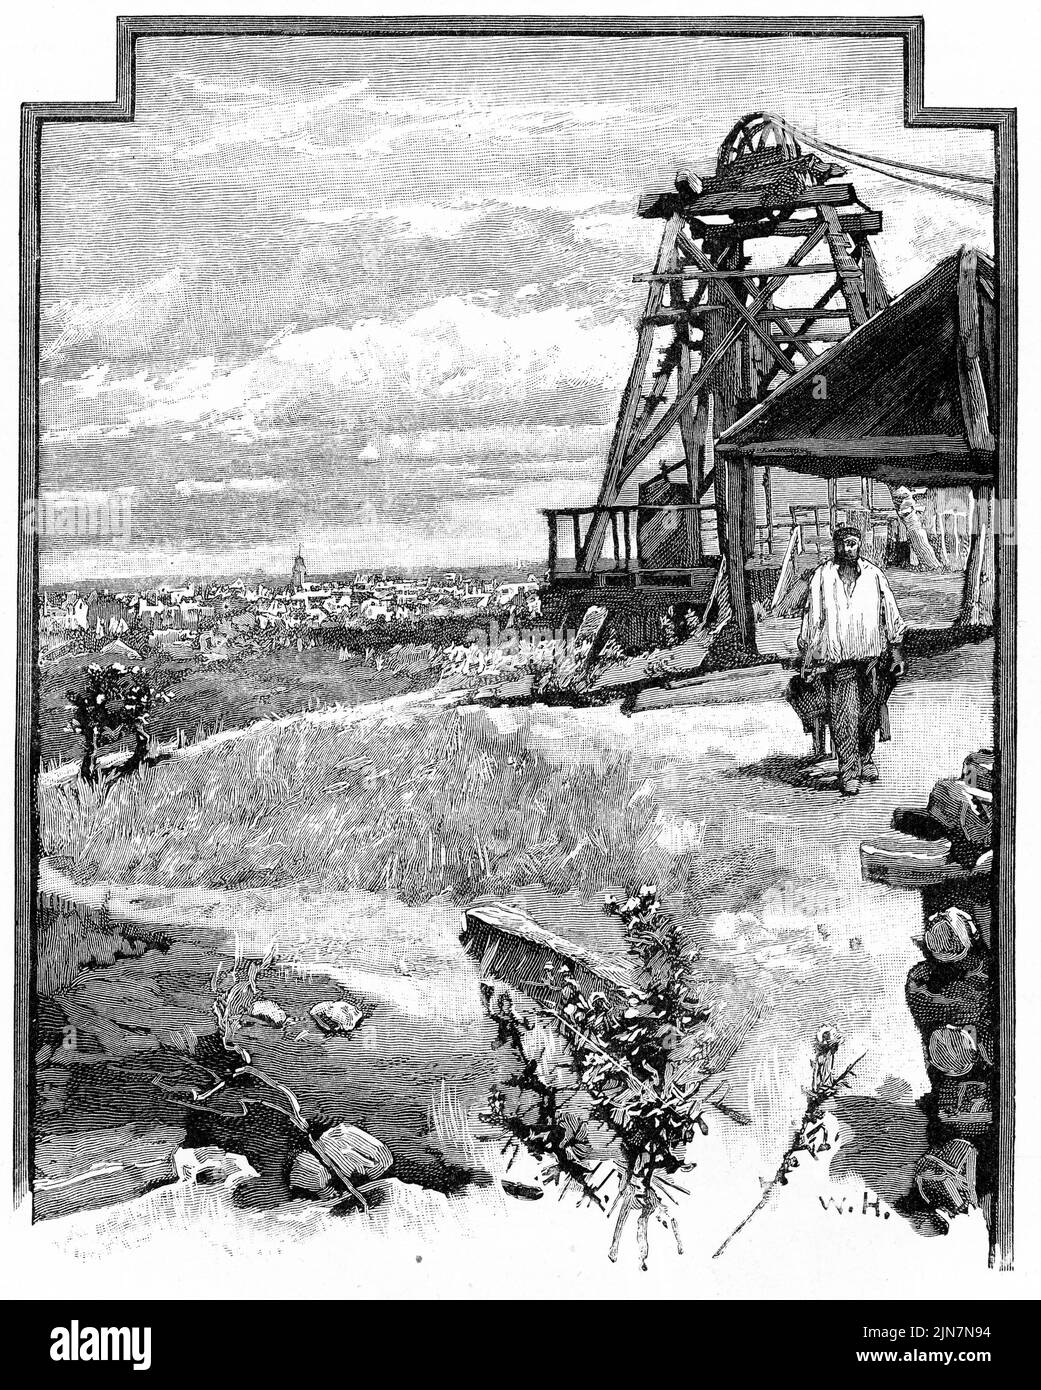 Engraving of a poppet head of a gold mine overlooking a mining town Stock Photo